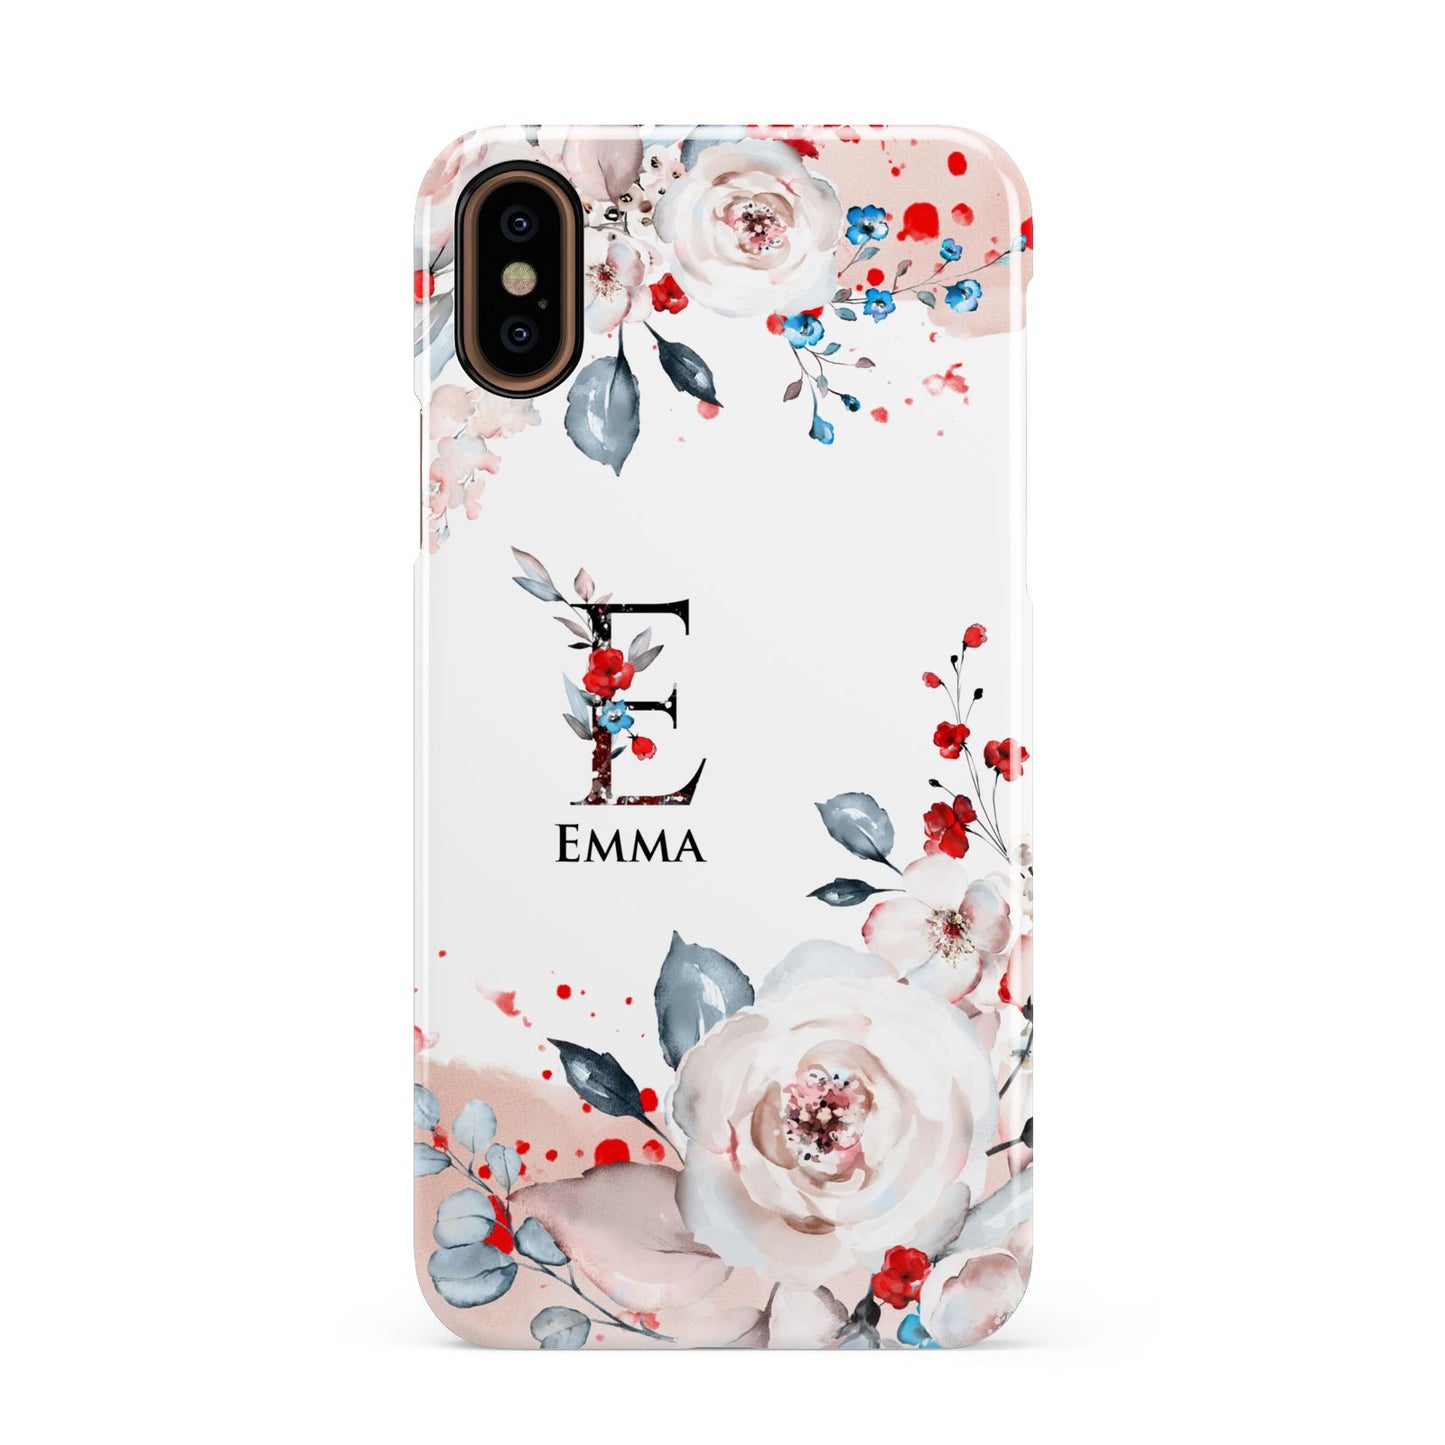 Monogrammed Roses Floral Wreath Apple iPhone XS 3D Snap Case